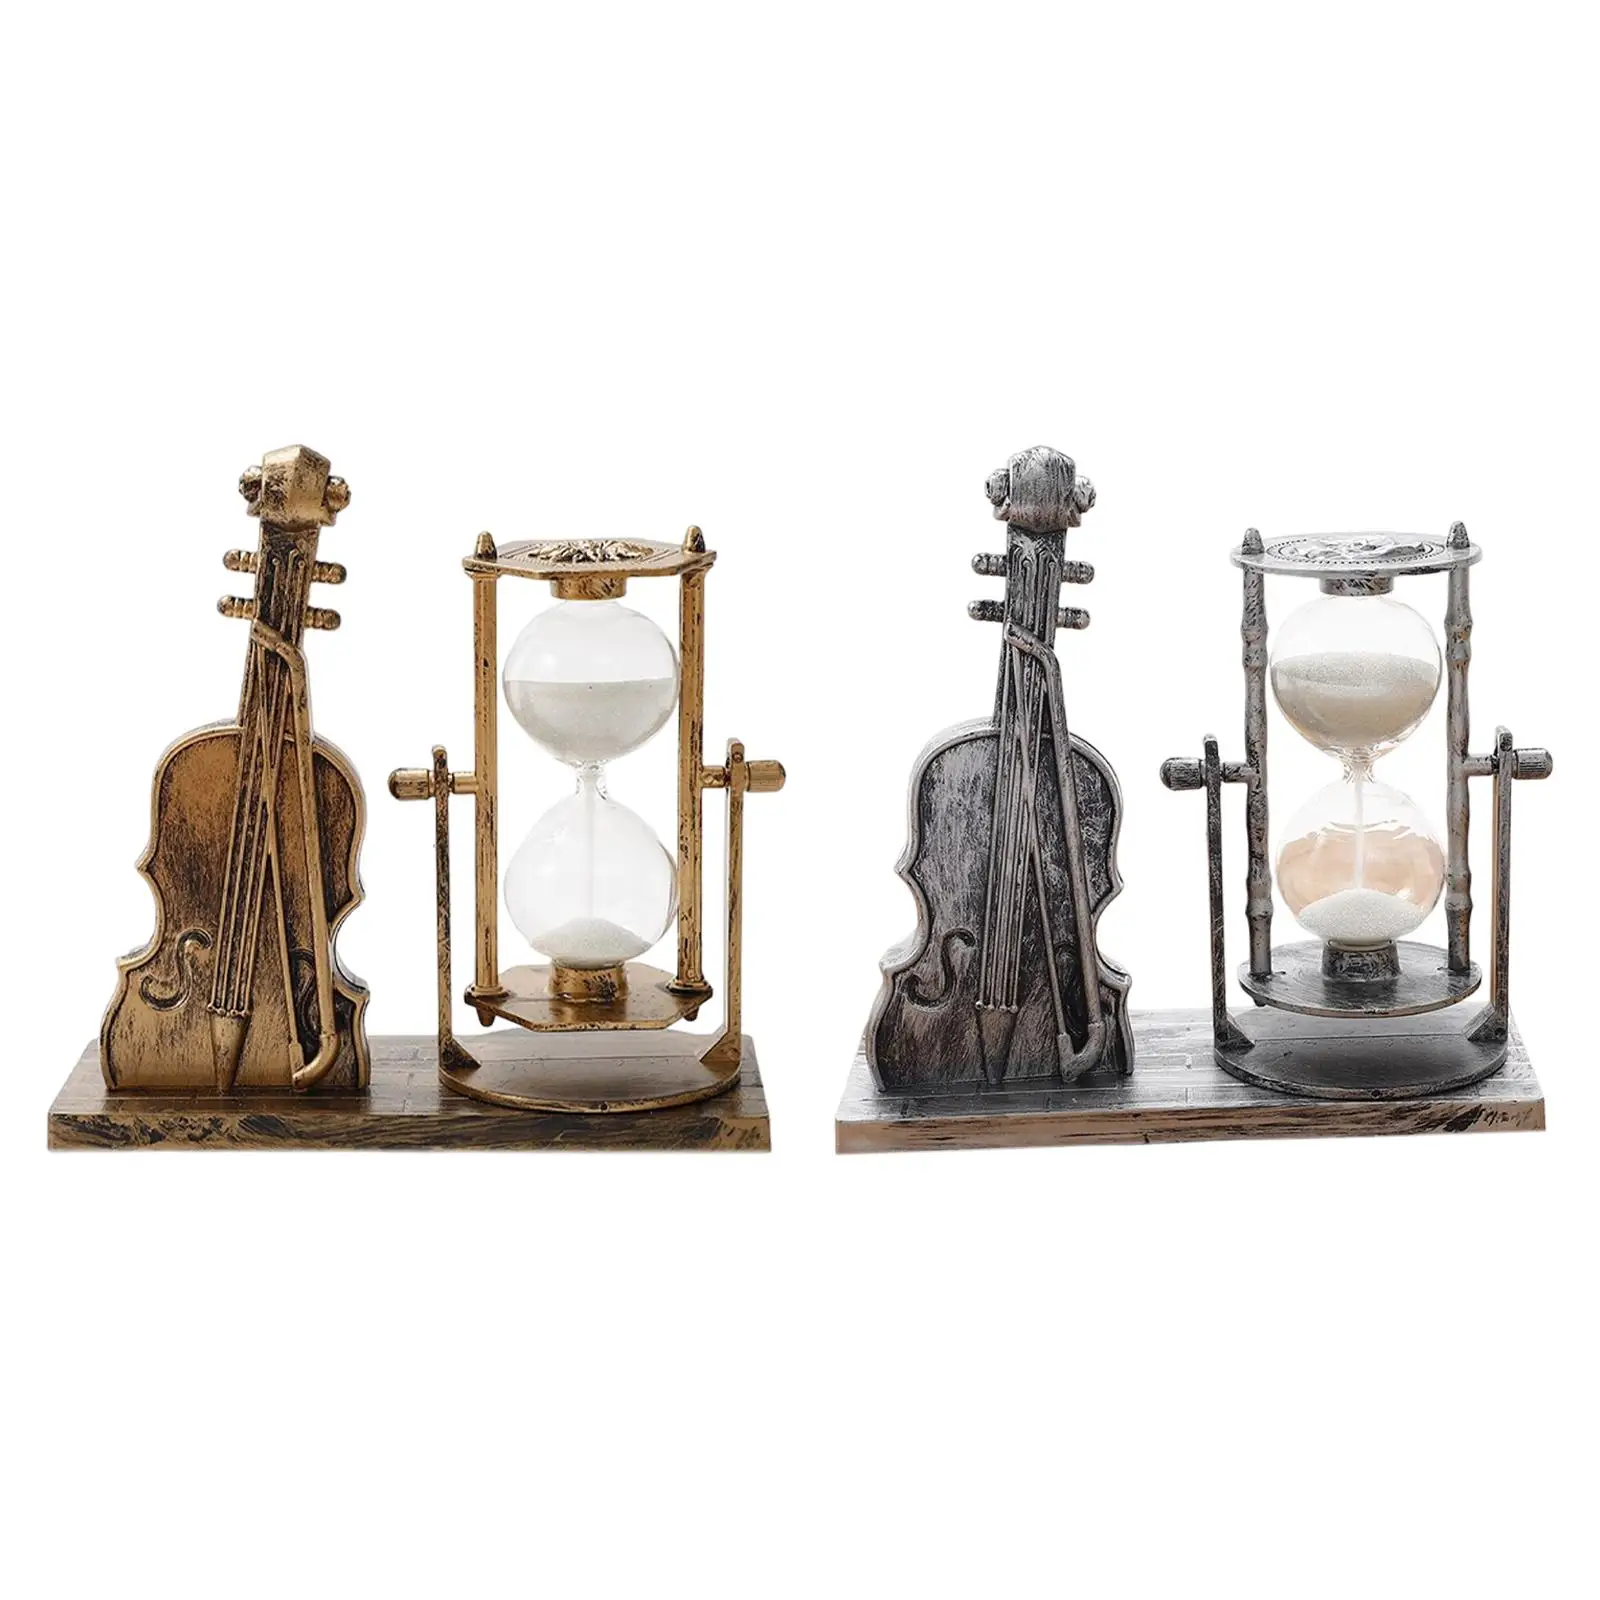 Violin Hourglasses Sandglass Exquisite Ornaments Collection Musical Instrument for Lawn Holiday Table Centerpieces Decoration